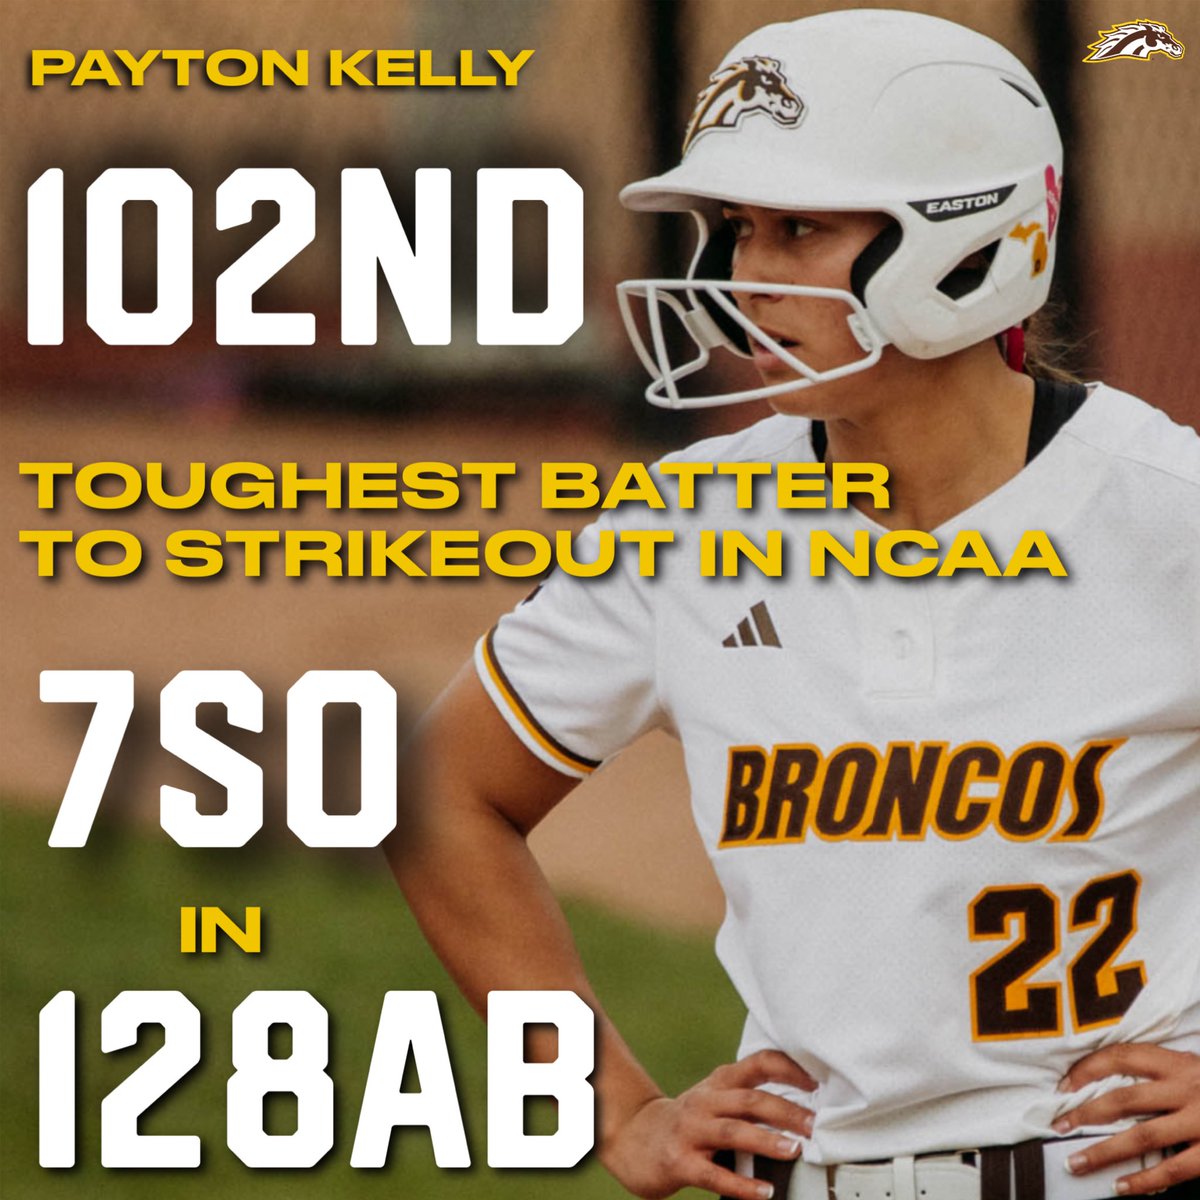 @HaleyBoxwell .@payton_kelly8 rounds us out as the 102nd toughest batter in the NCAA to strikeout! 💪